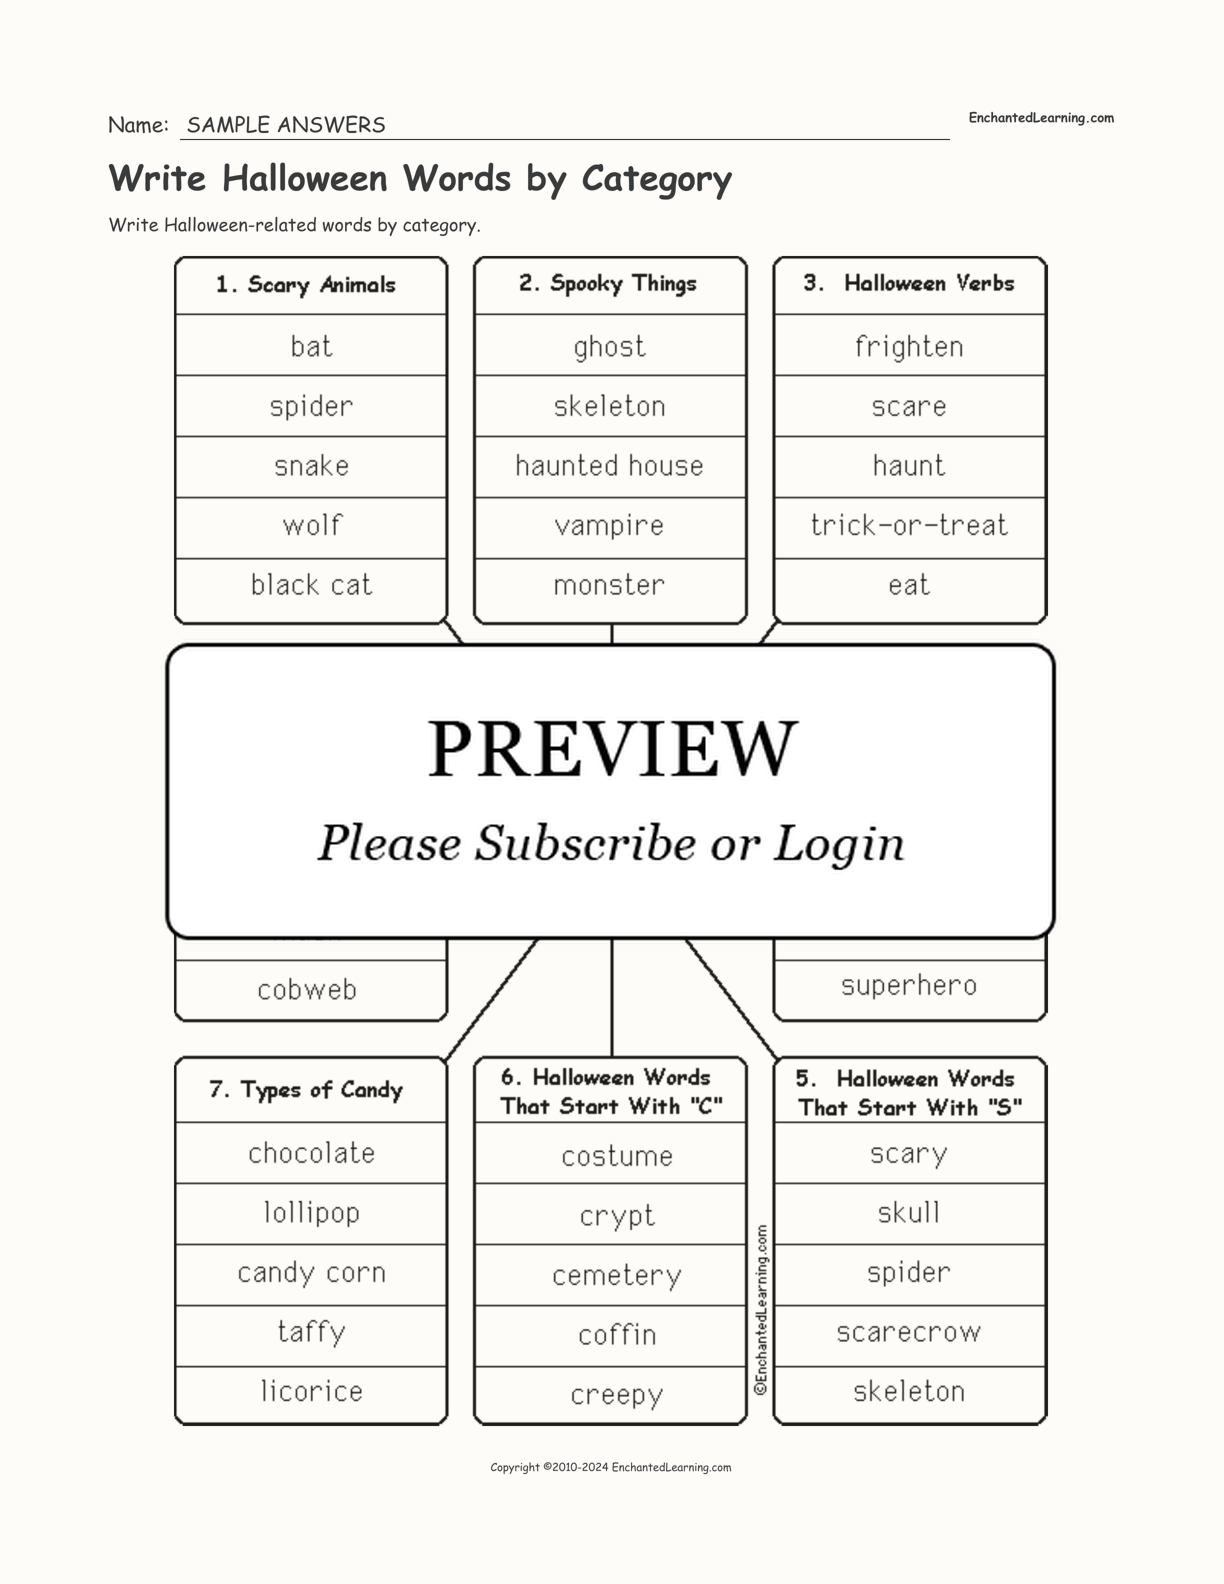 Write Halloween Words by Category interactive worksheet page 2